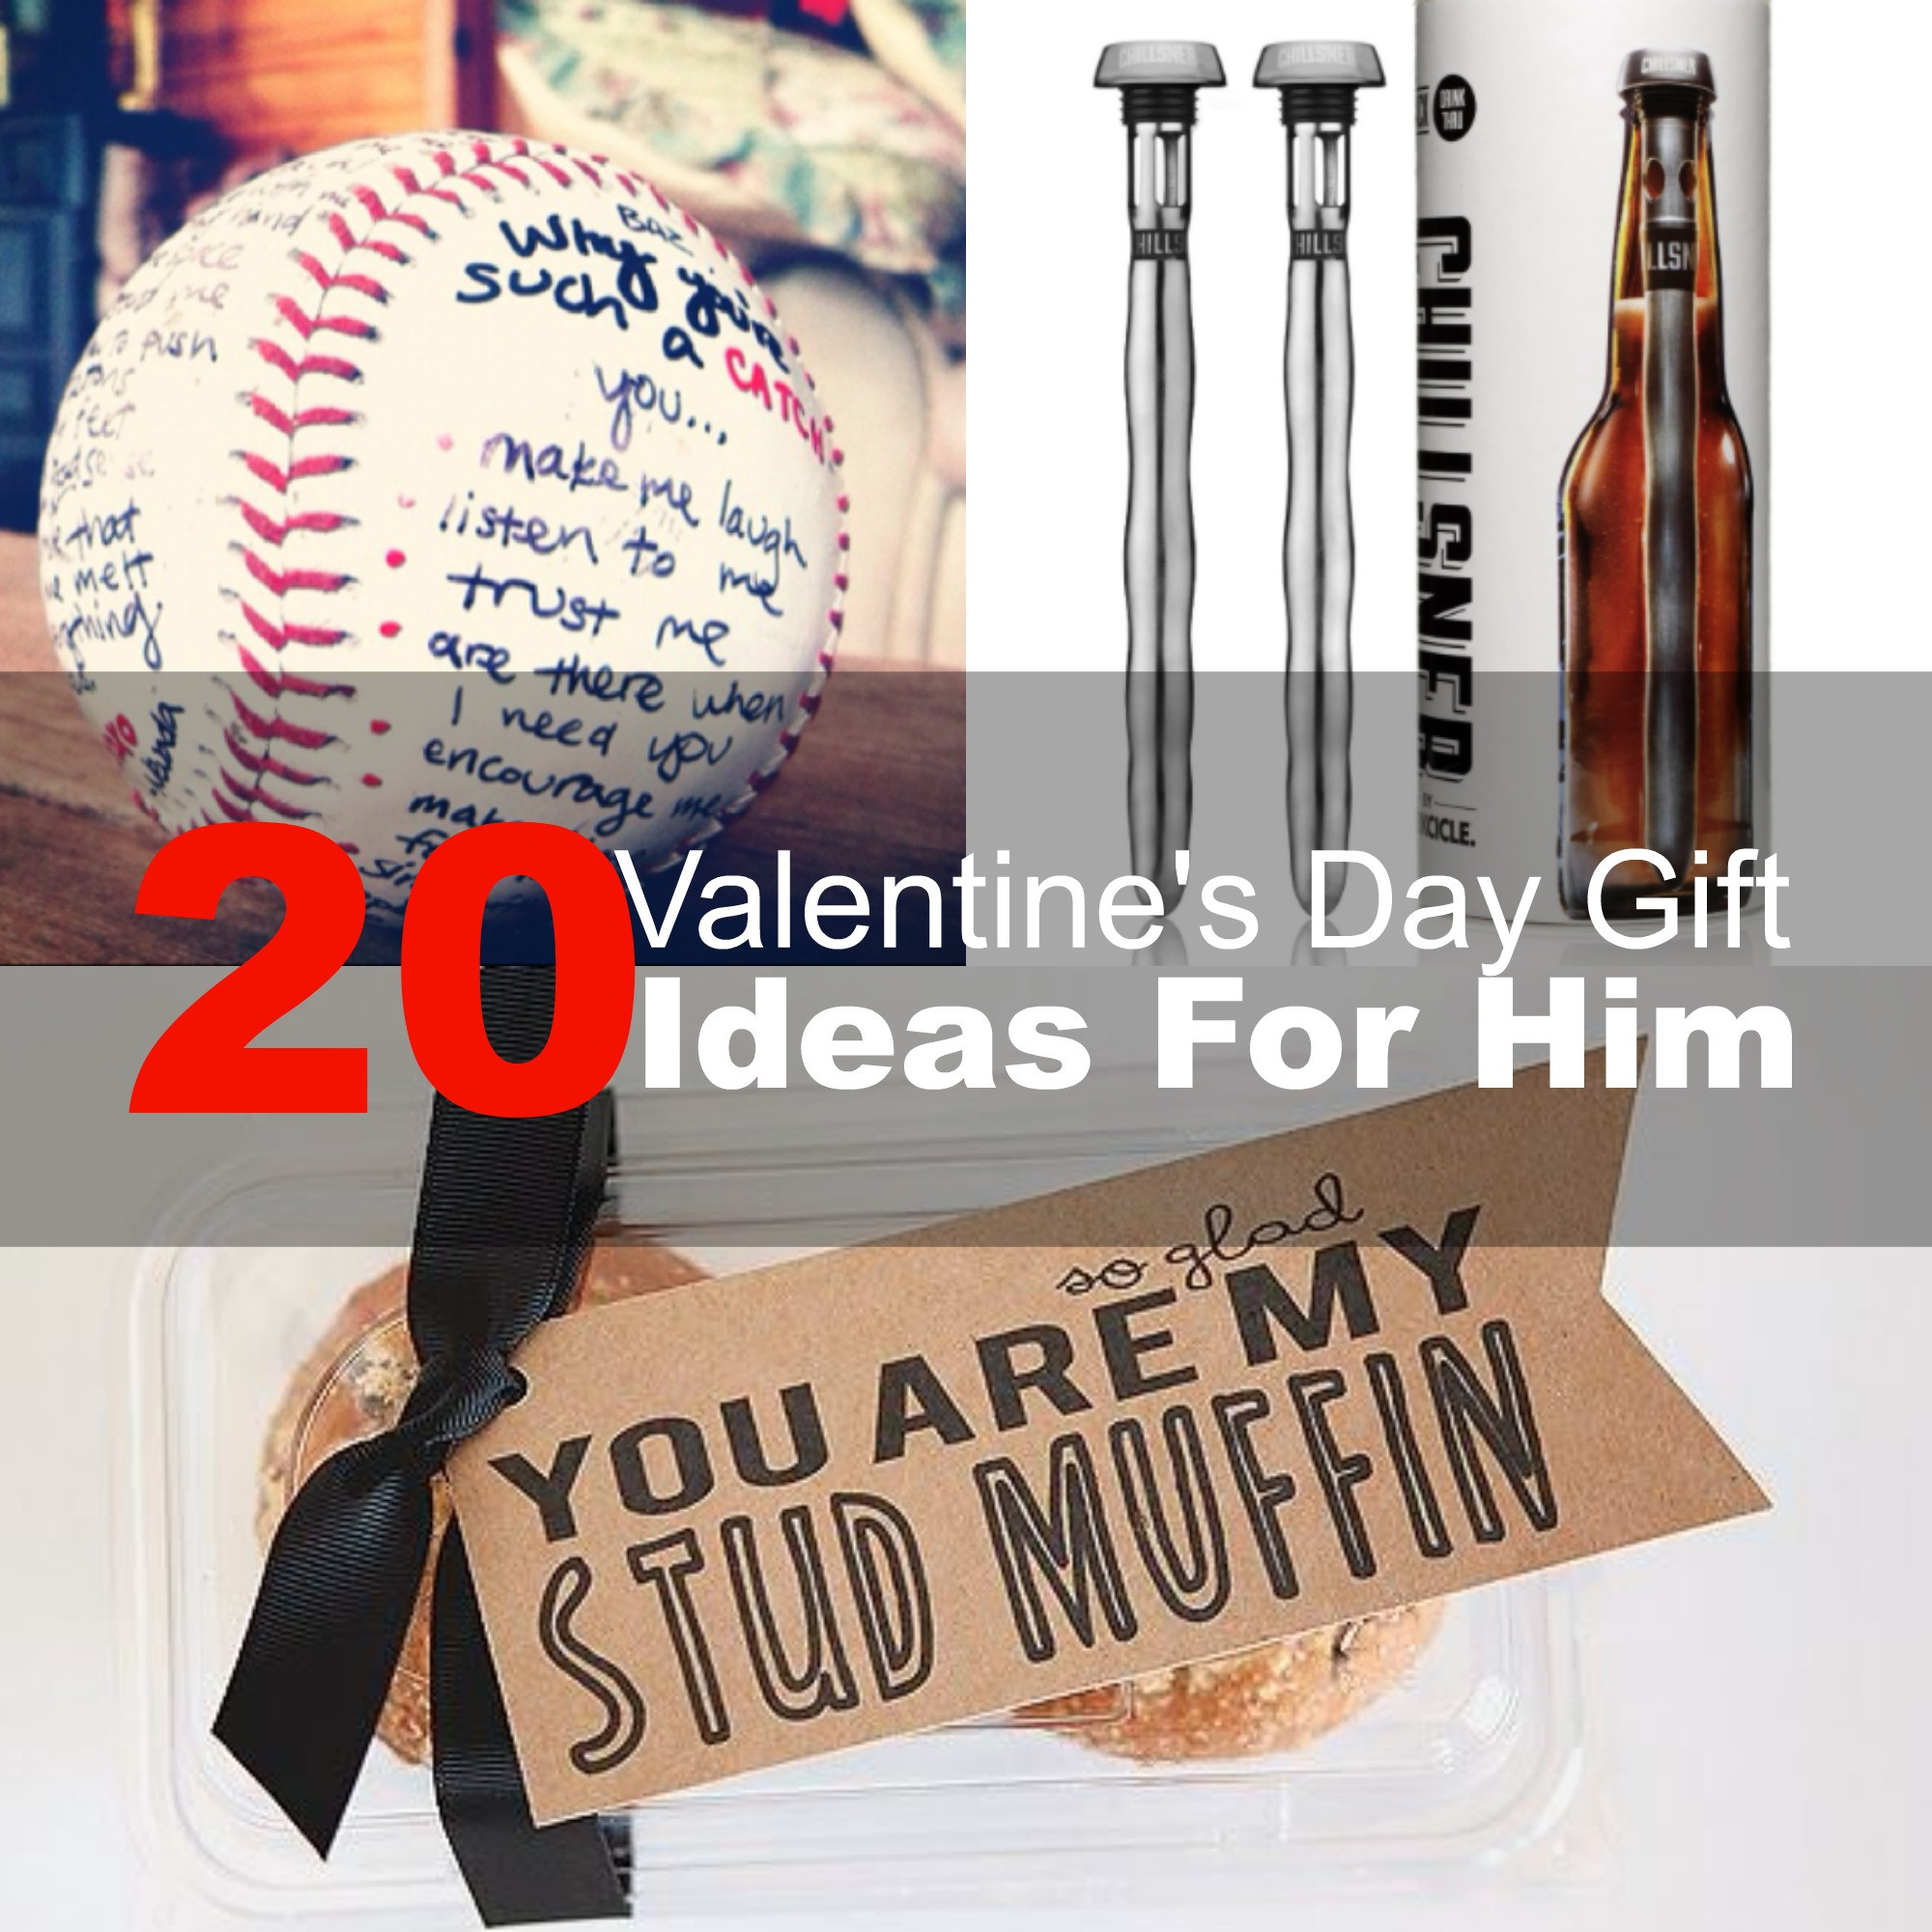 Valentines Day Gifts For Him 2016
 20 Valentine s Day Gift Ideas For Him 2016